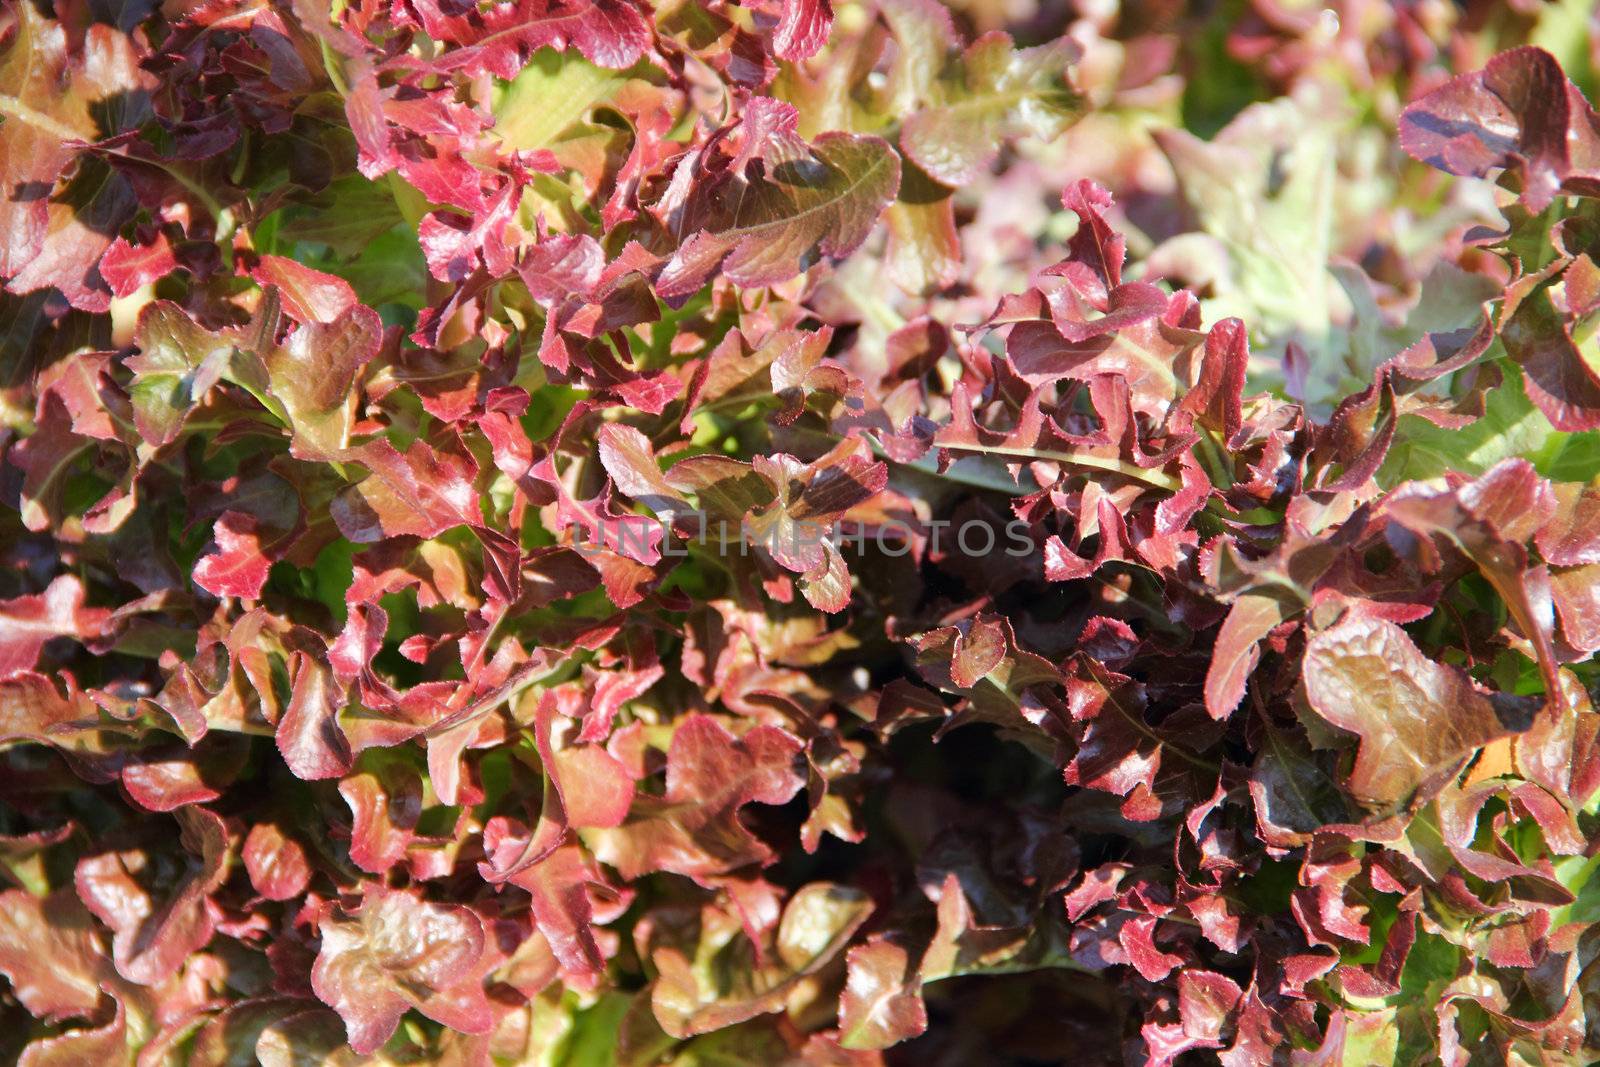 Red lettuce on a garden bed close up